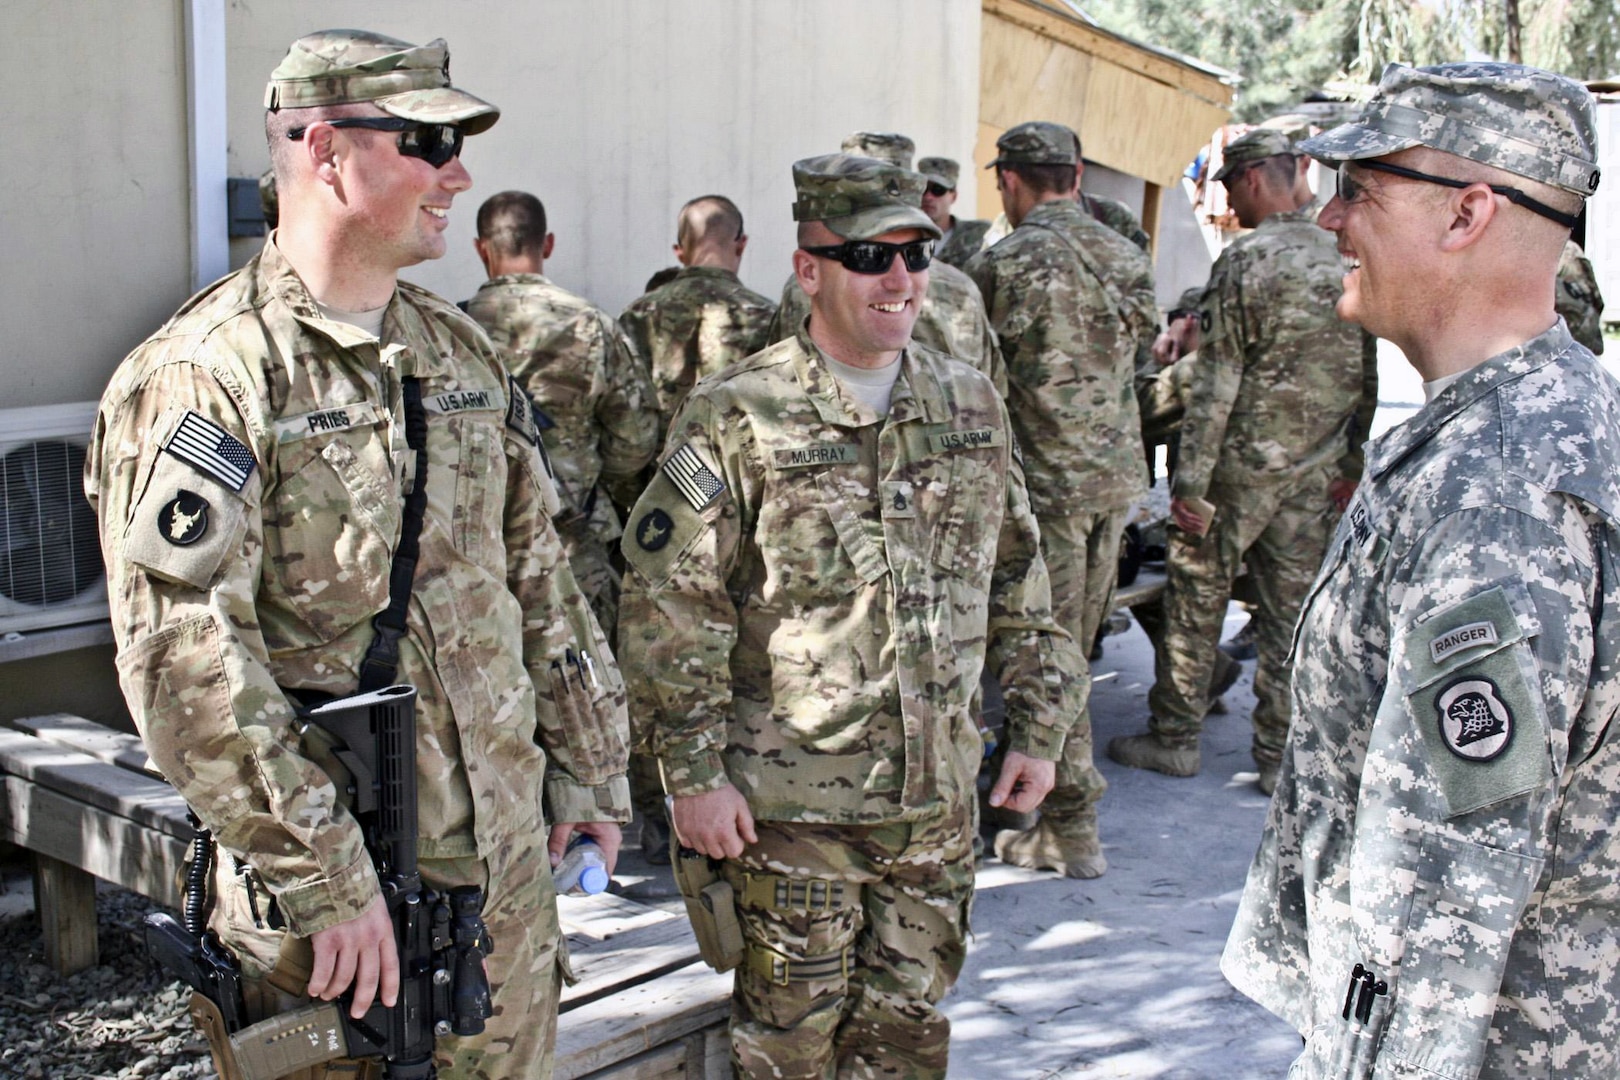 Army Maj. Gen. Tim E. Orr, right, adjutant general of the Iowa National
Guard, talks with Army Staff Sgt. Jacob Pries, left, an engineer with
Headquarters and Headquarters Company, 2nd Brigade Combat Team, 34th
Infantry Division, and  Army Staff Sgt. Scott Murray Jr., center, a squad
leader with Company A, 1st Battalion, 133rd Infantry Regiment, March 22,
2011, during his visit to Forward Operating Base Mehtar Lam, Afghanistan.